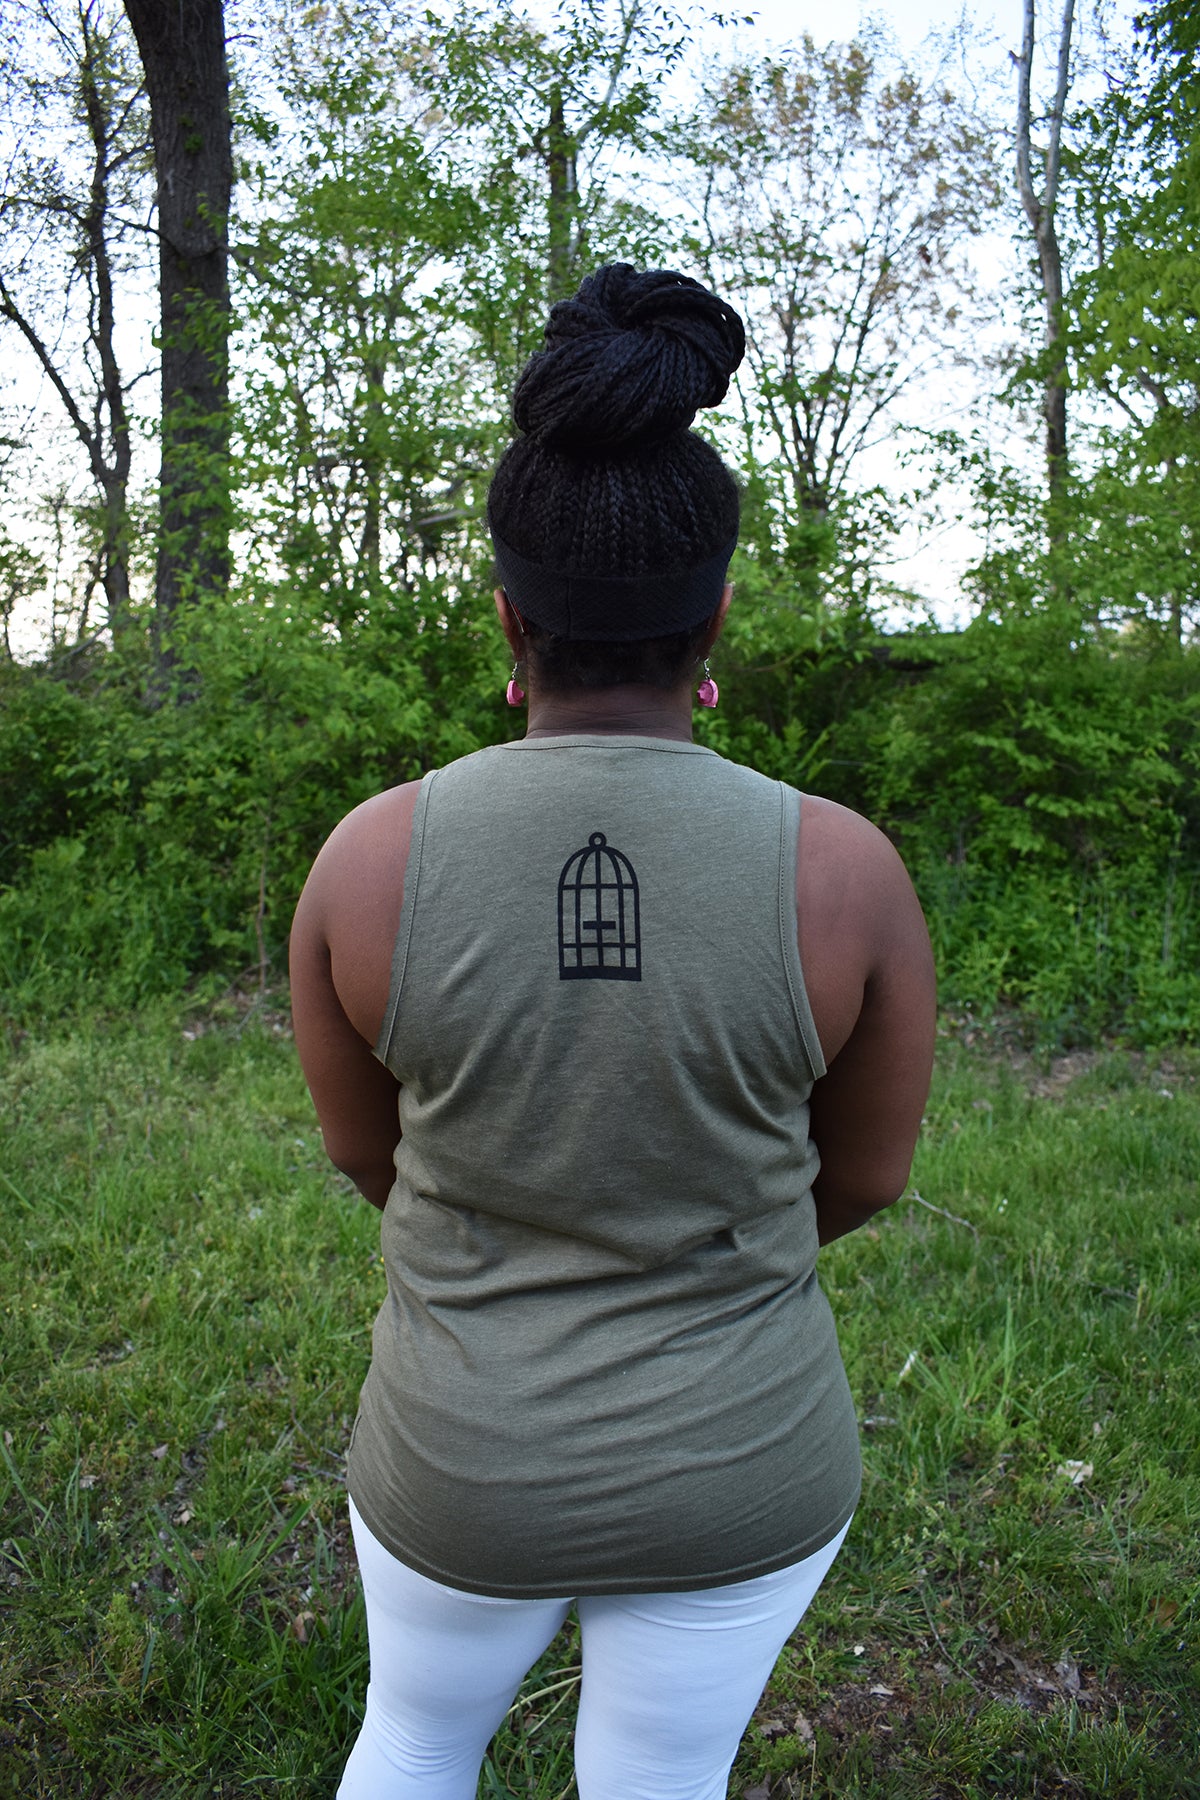 Female model wearing a green tank top a small No Egrets Birdcage logo in black on the back between the shoulders.